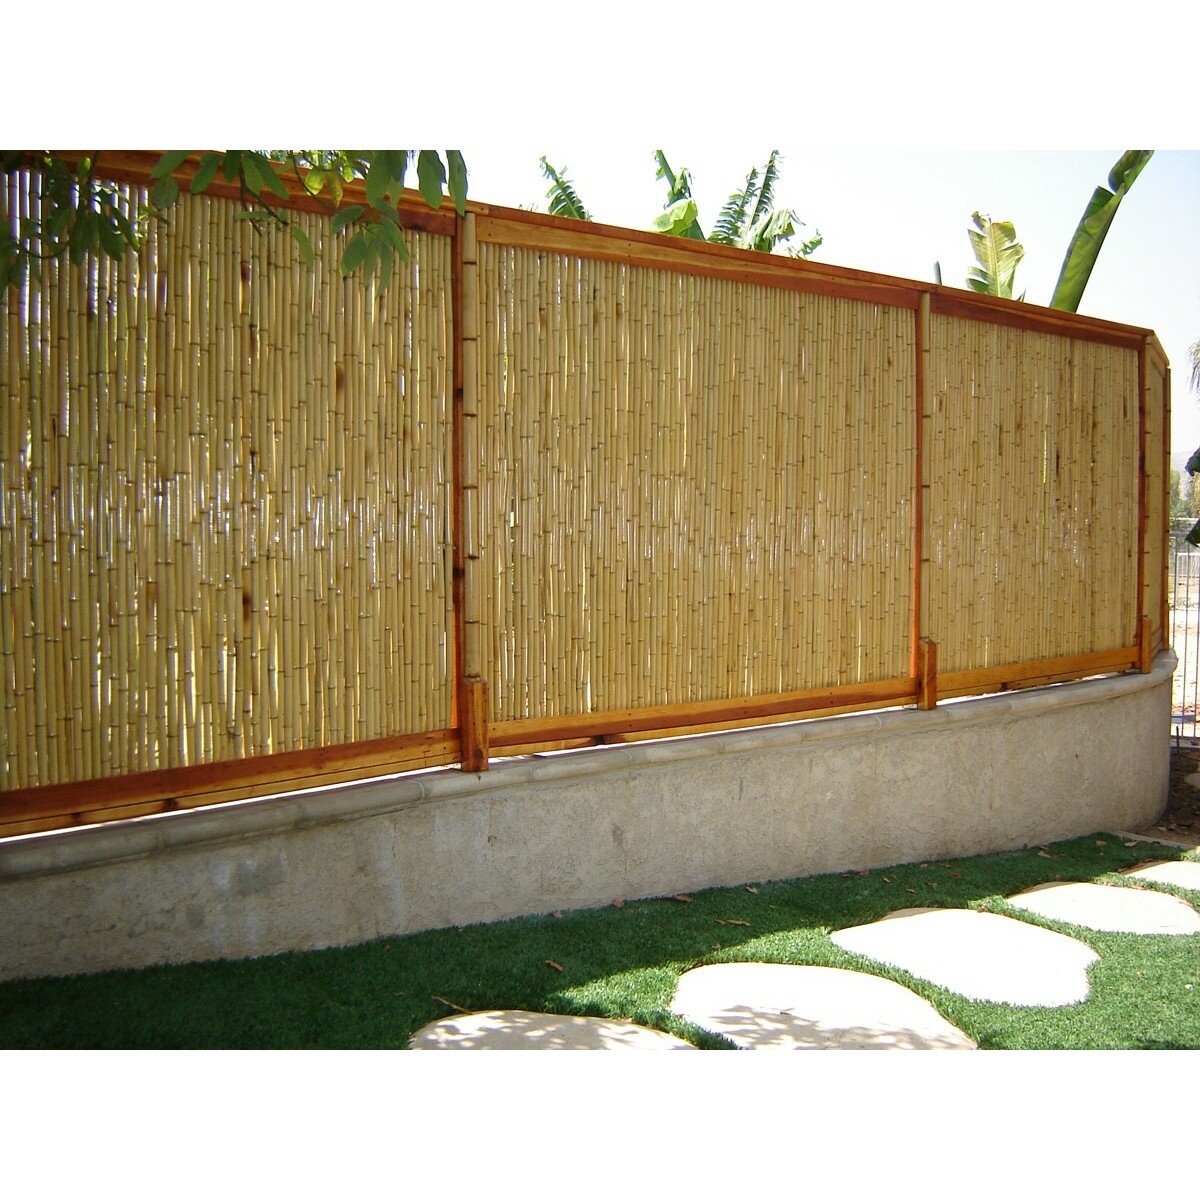 Backyard X Scapes Rolled Bamboo Fencing Reviews Wayfair